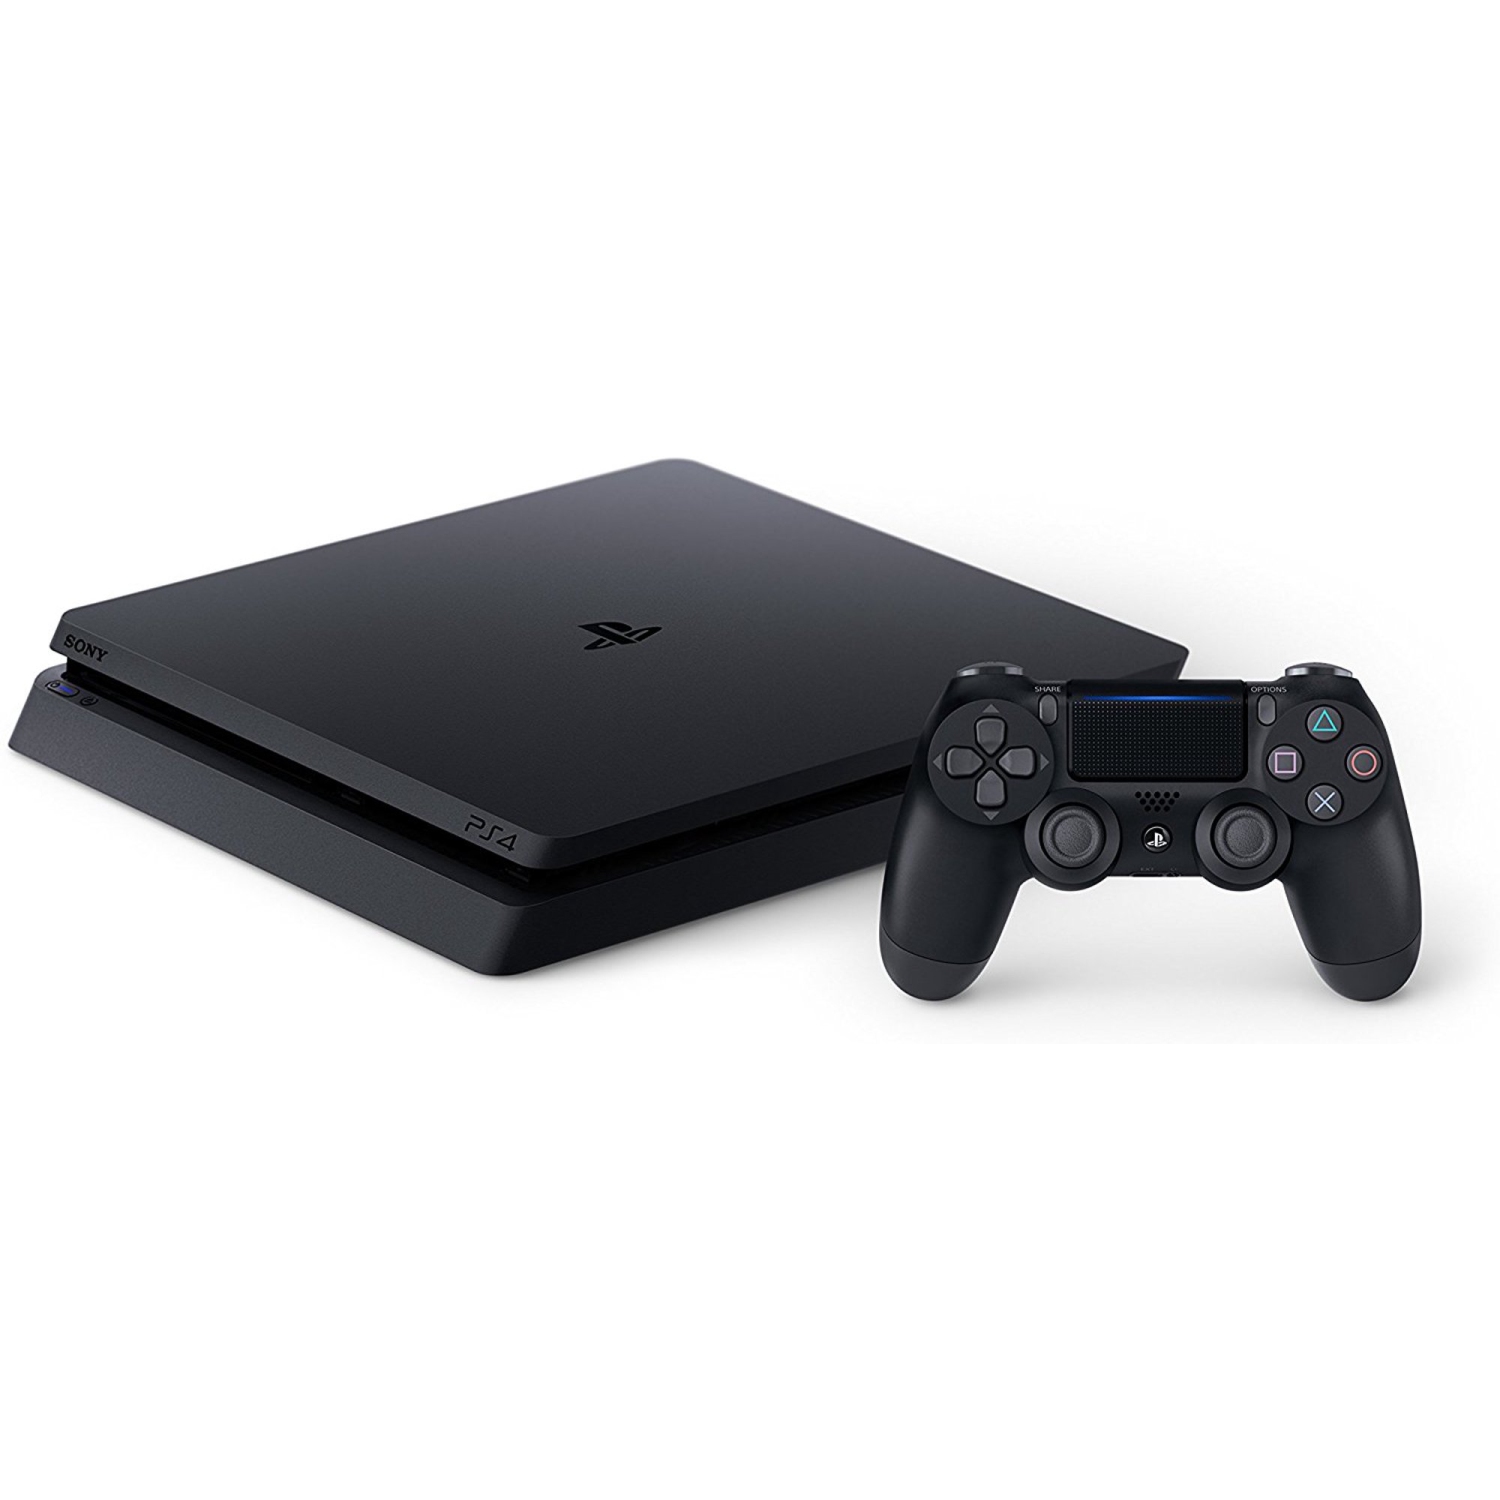 Refurbished (Excellent) - Sony PS4 PlayStation 4 Slim CUH2015B 1TB Hard Drive with Controller - Certified Refurbished